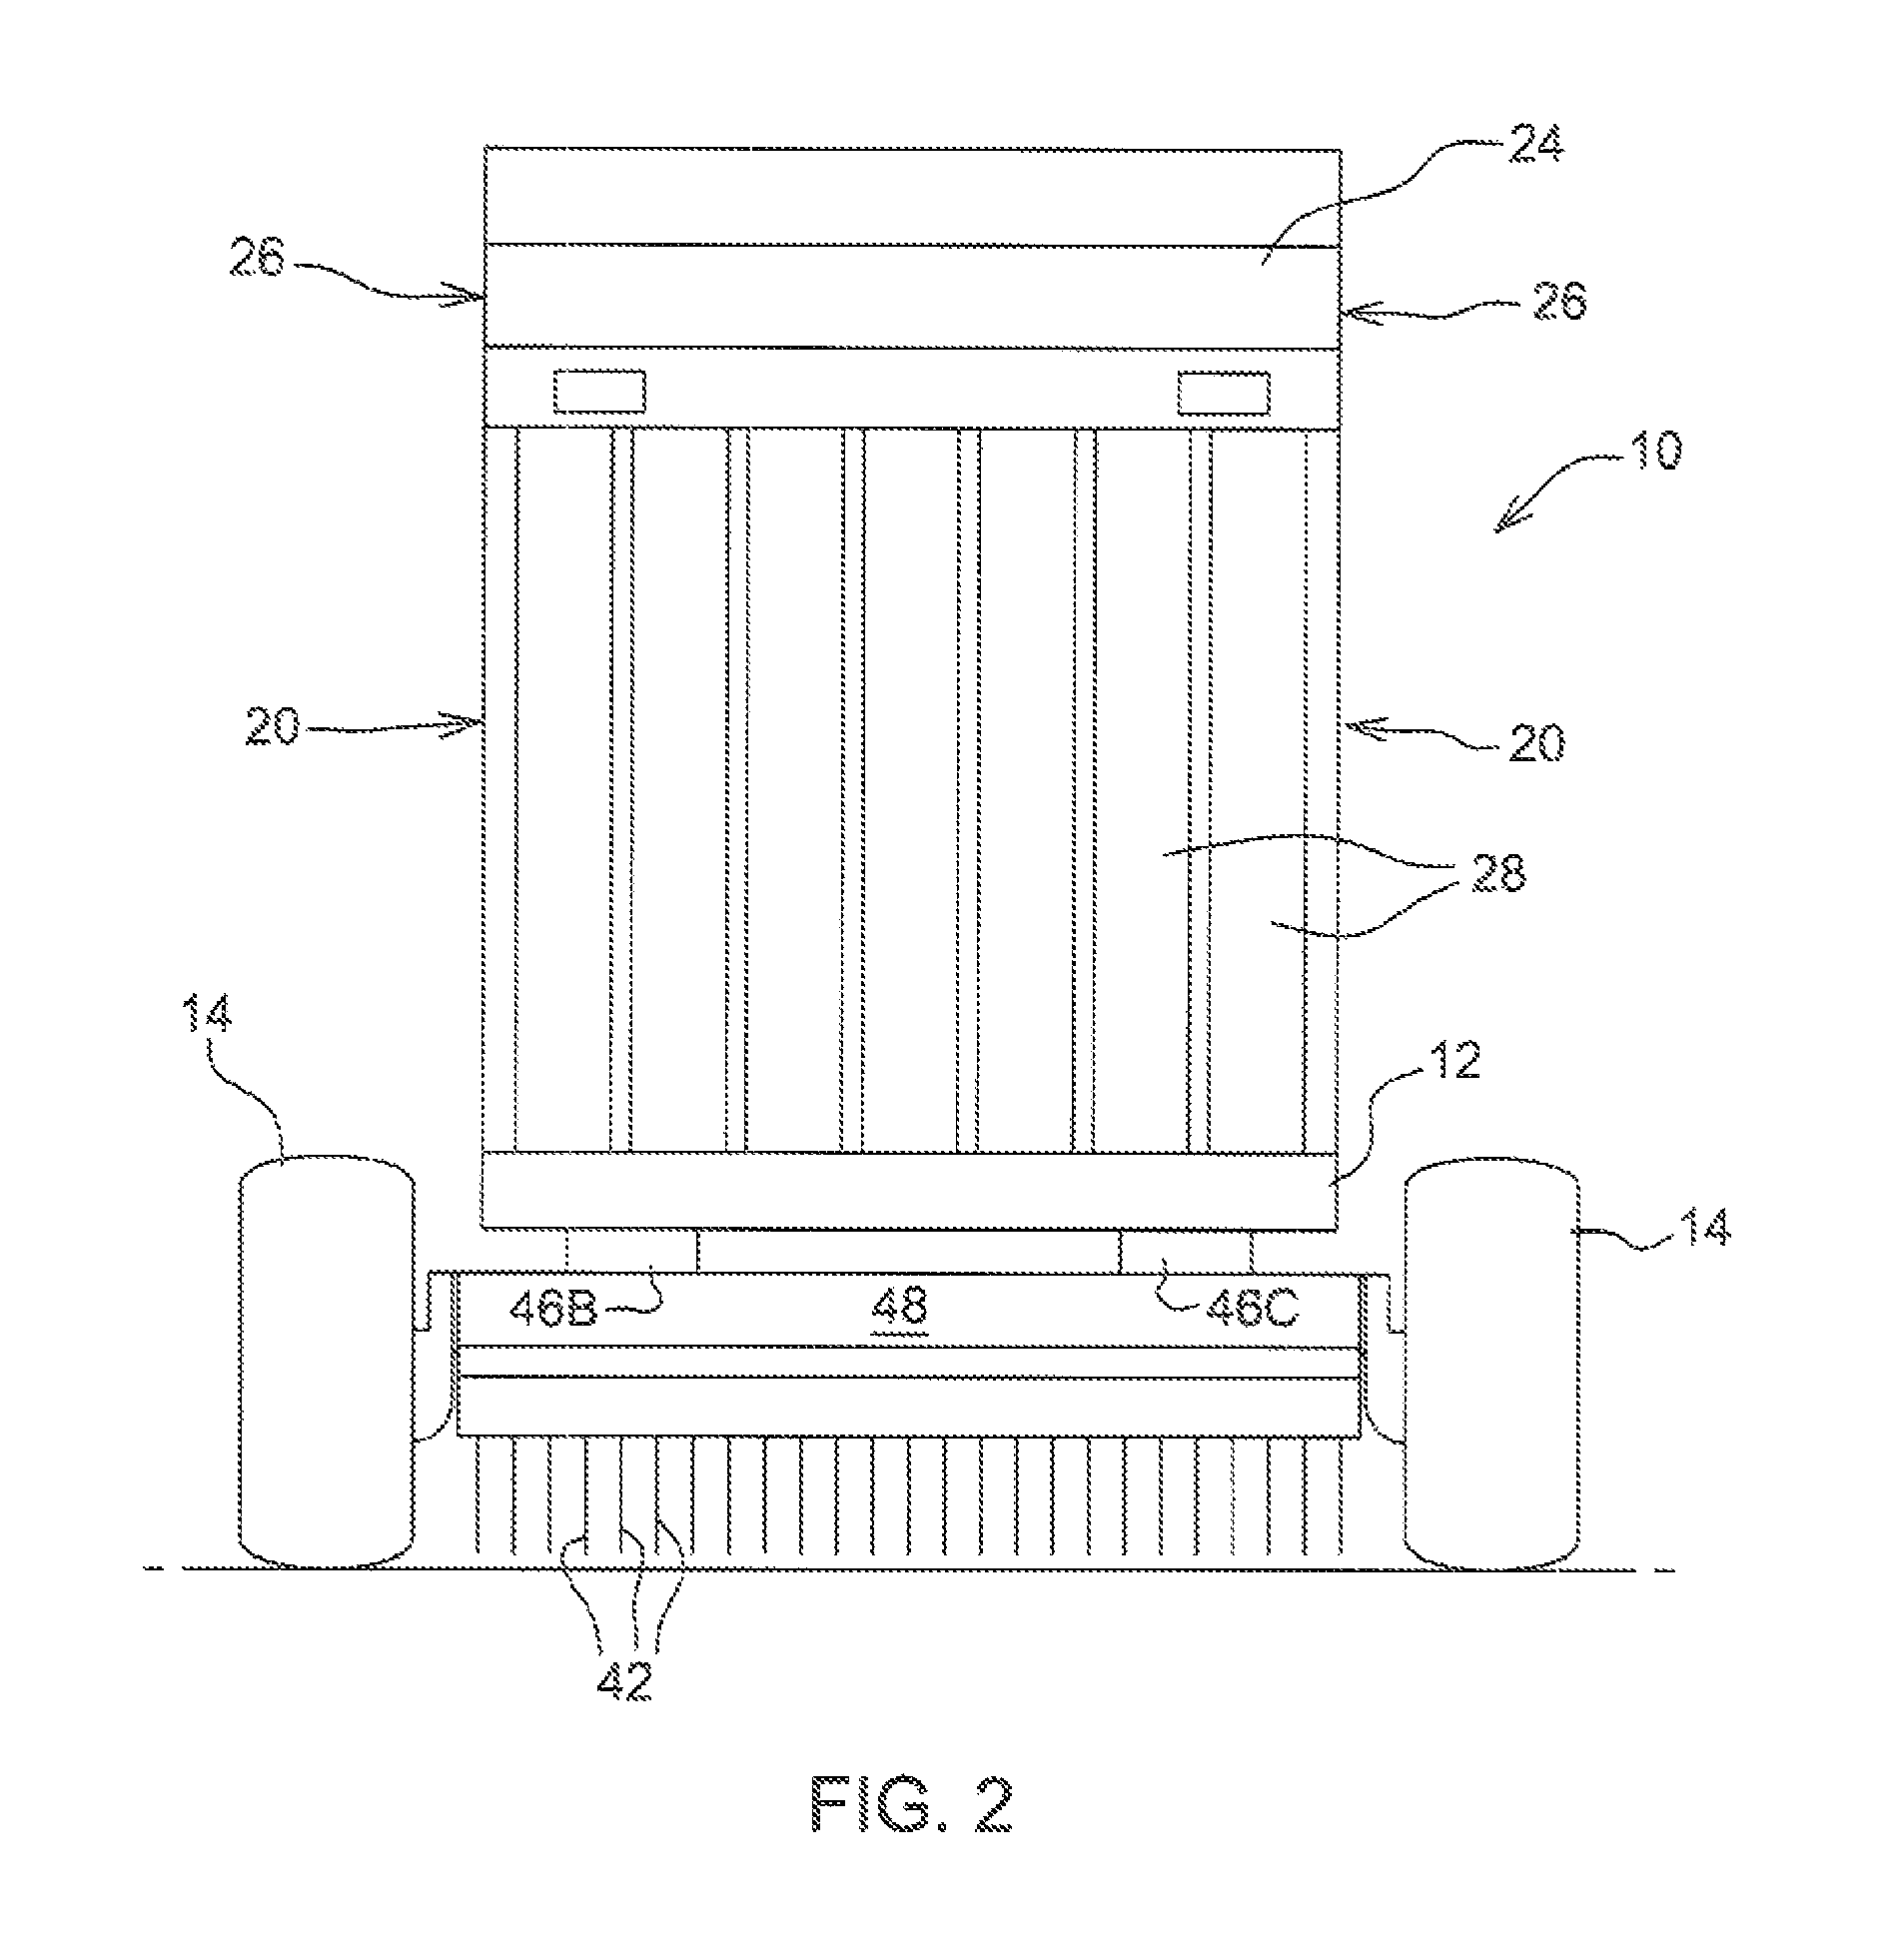 Method for adjusting a tare weight of an agricultural baler to reflect usage of preservative in treating formed bale